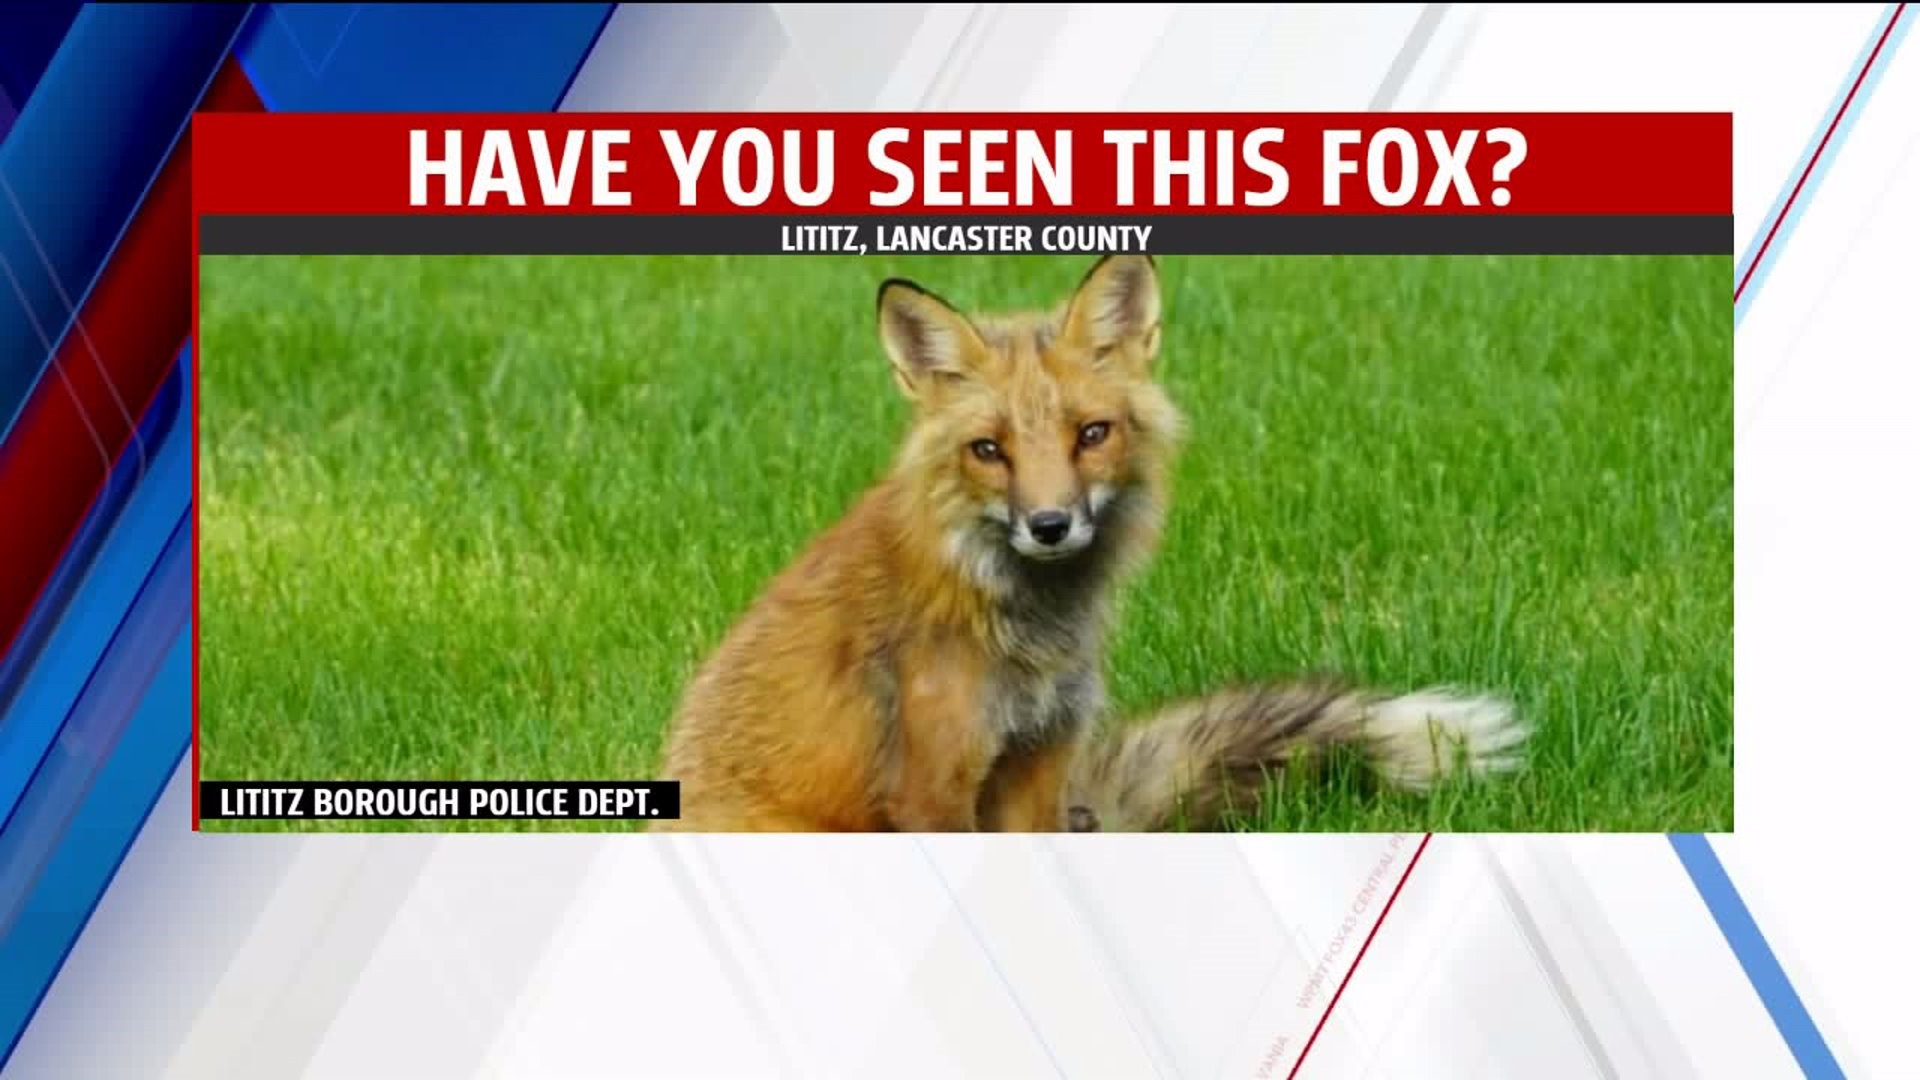 Lititz Police Dept. offers tips (some comical) for dealing with fox seen roaming around the borough